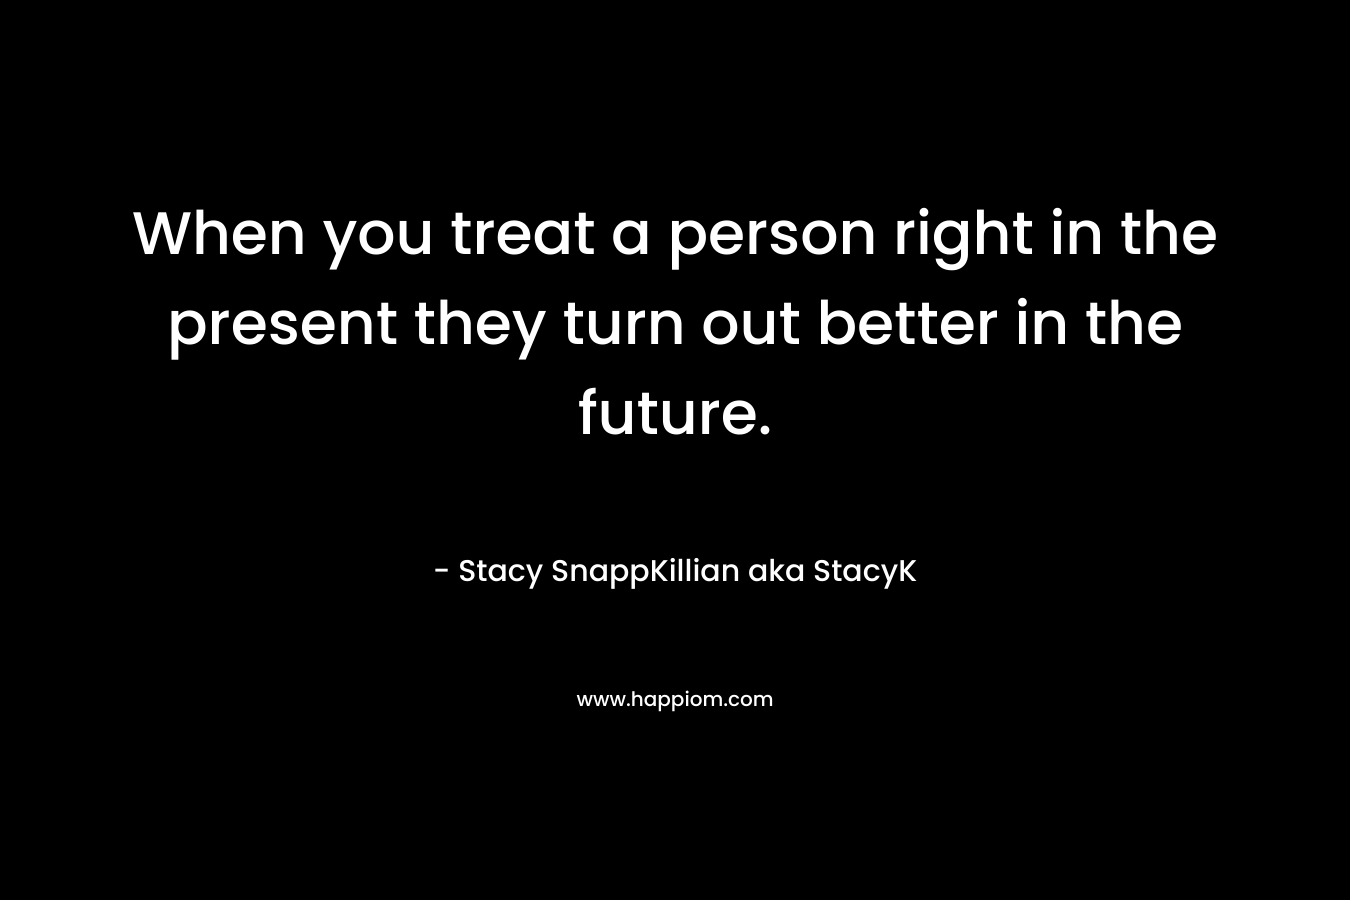 When you treat a person right in the present they turn out better in the future.